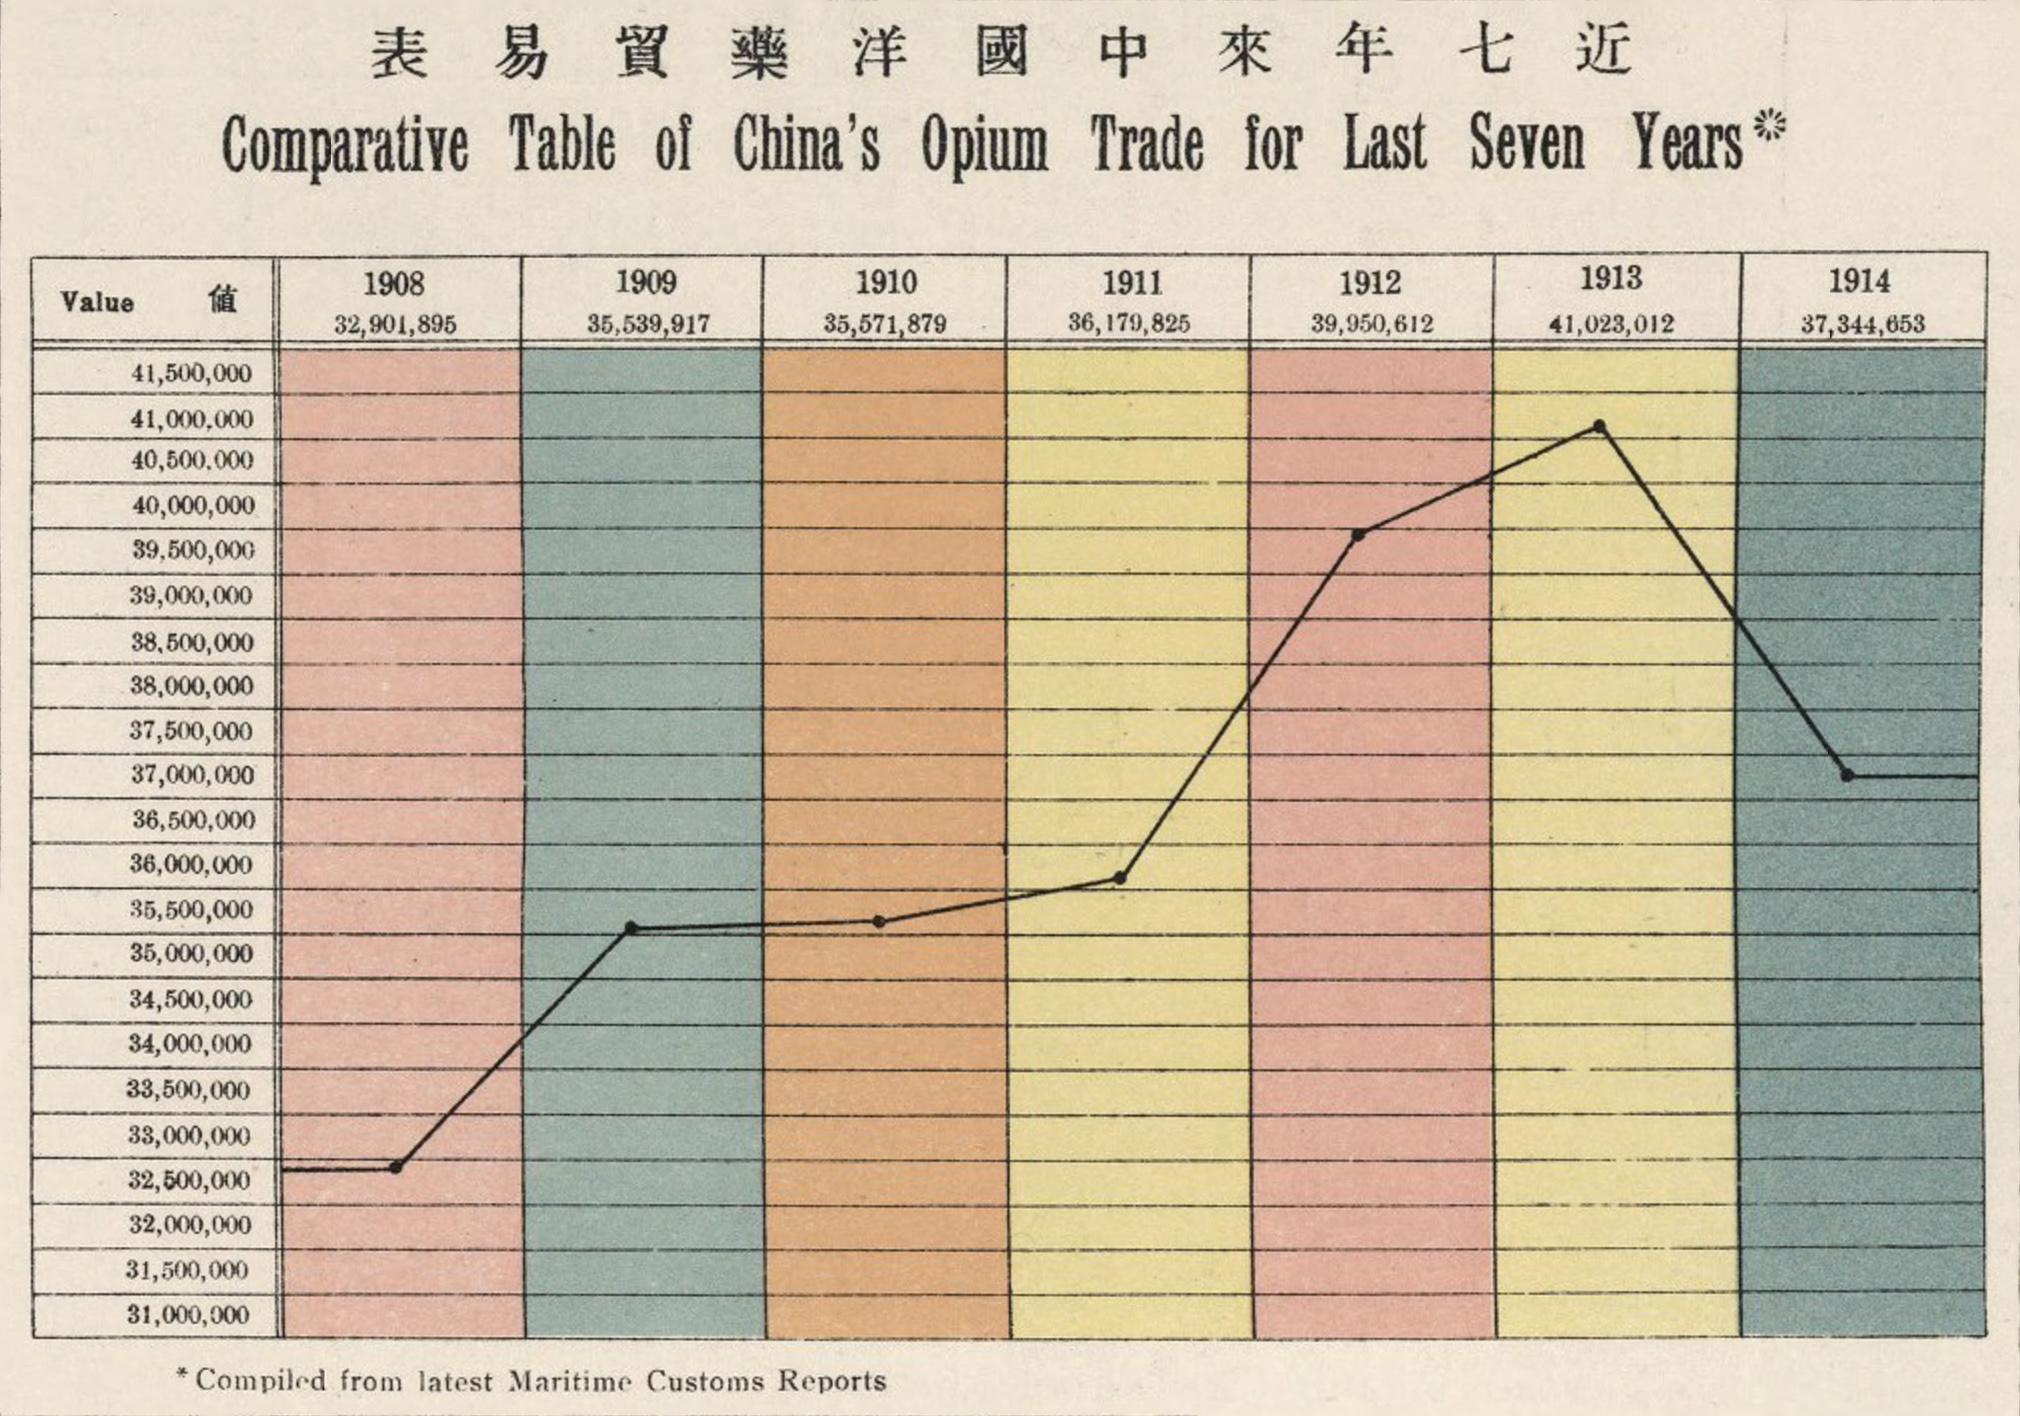 Chart showing China's opium trade in the early 20th century